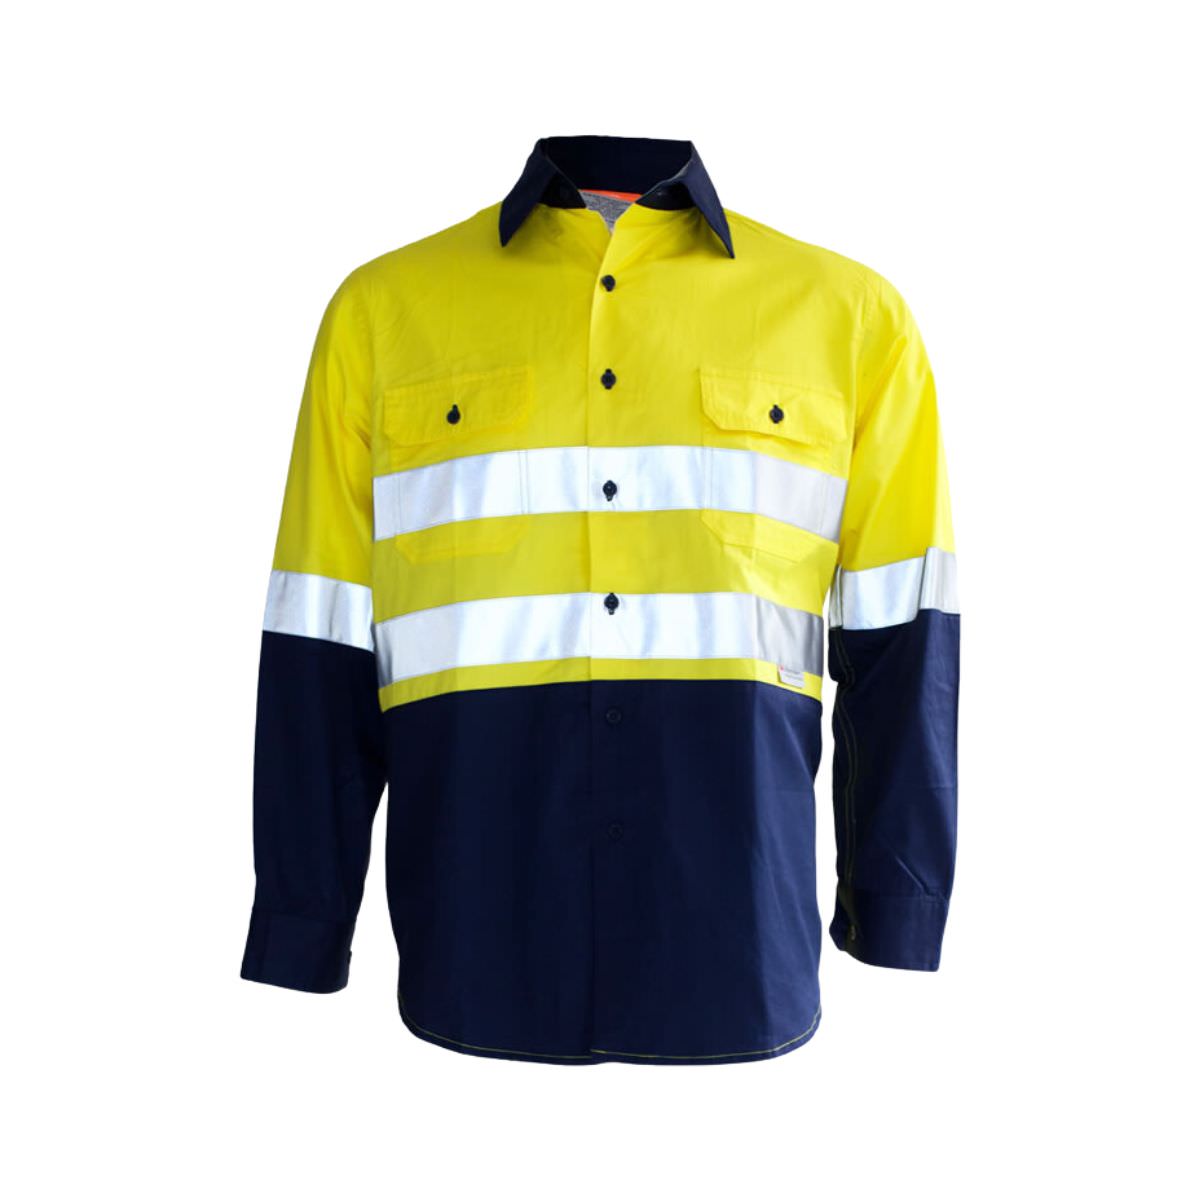 Light Weight Hi Visibility Cotton Drill Shirts With Reflective Tape 7LDYT